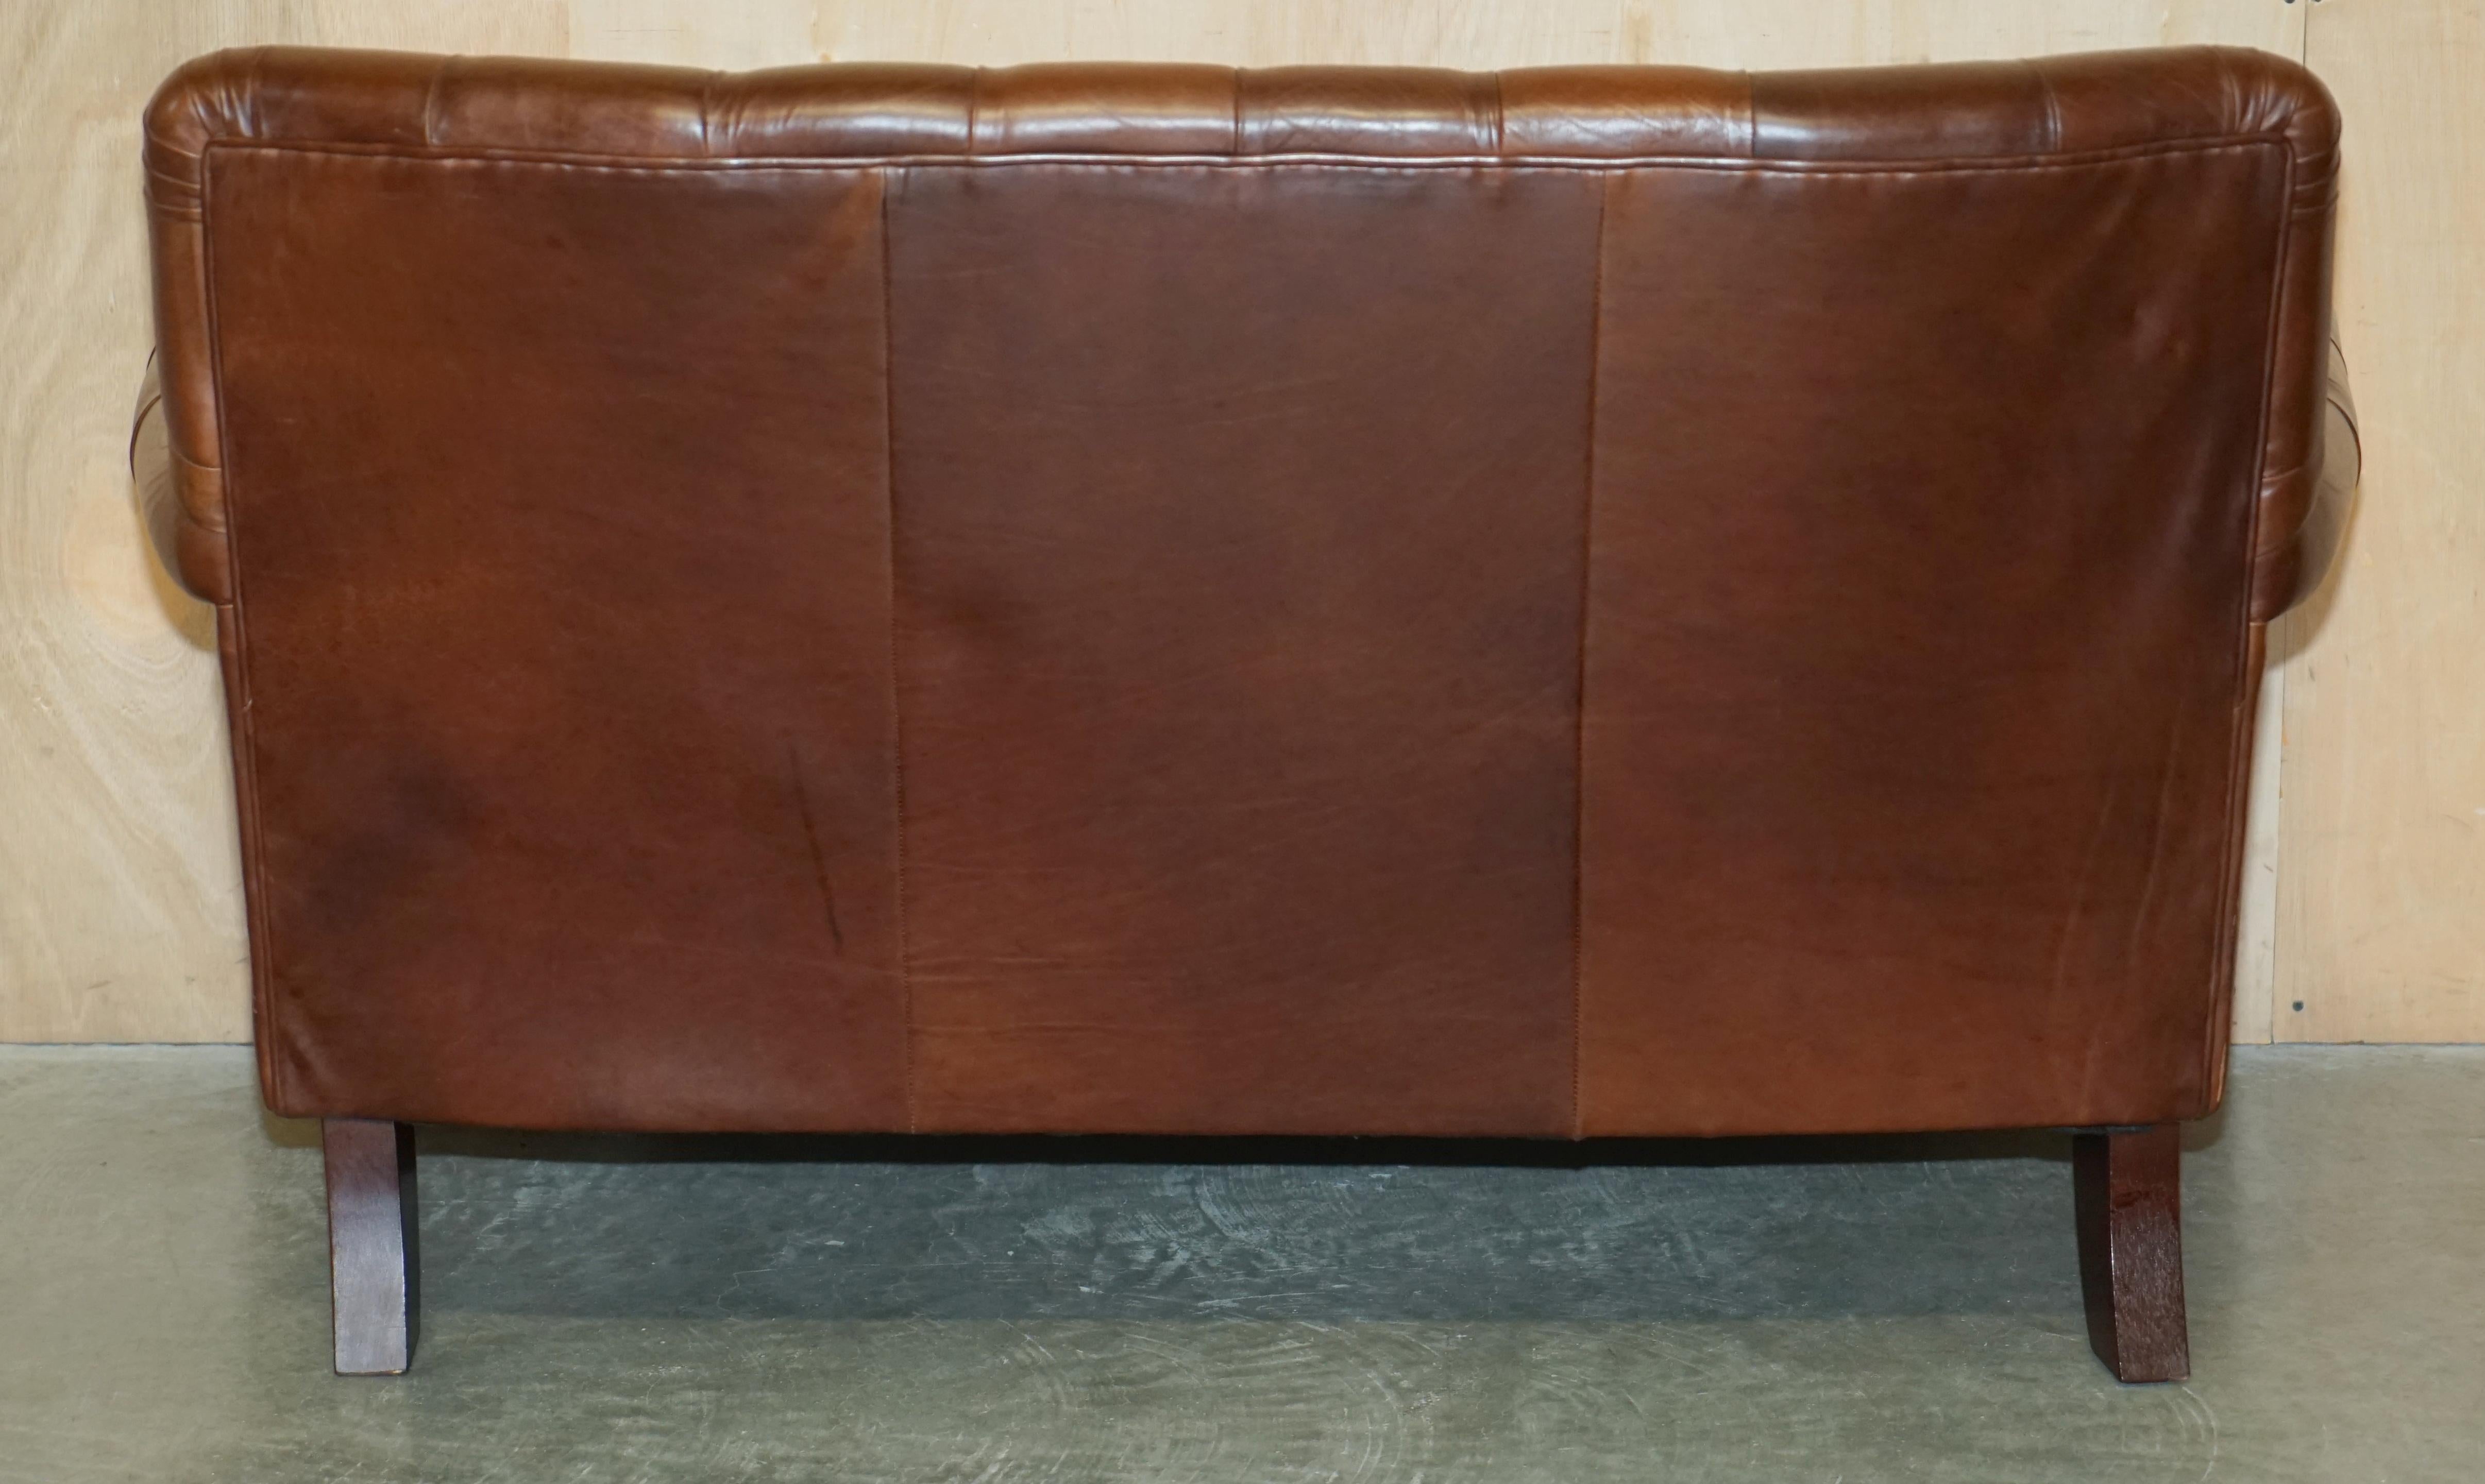 FiNE CHESTNUT BROWN LEATHER LAUREN ASHLEY CHESTERFIELD TWO SEAT LIBRARY SOFa For Sale 8